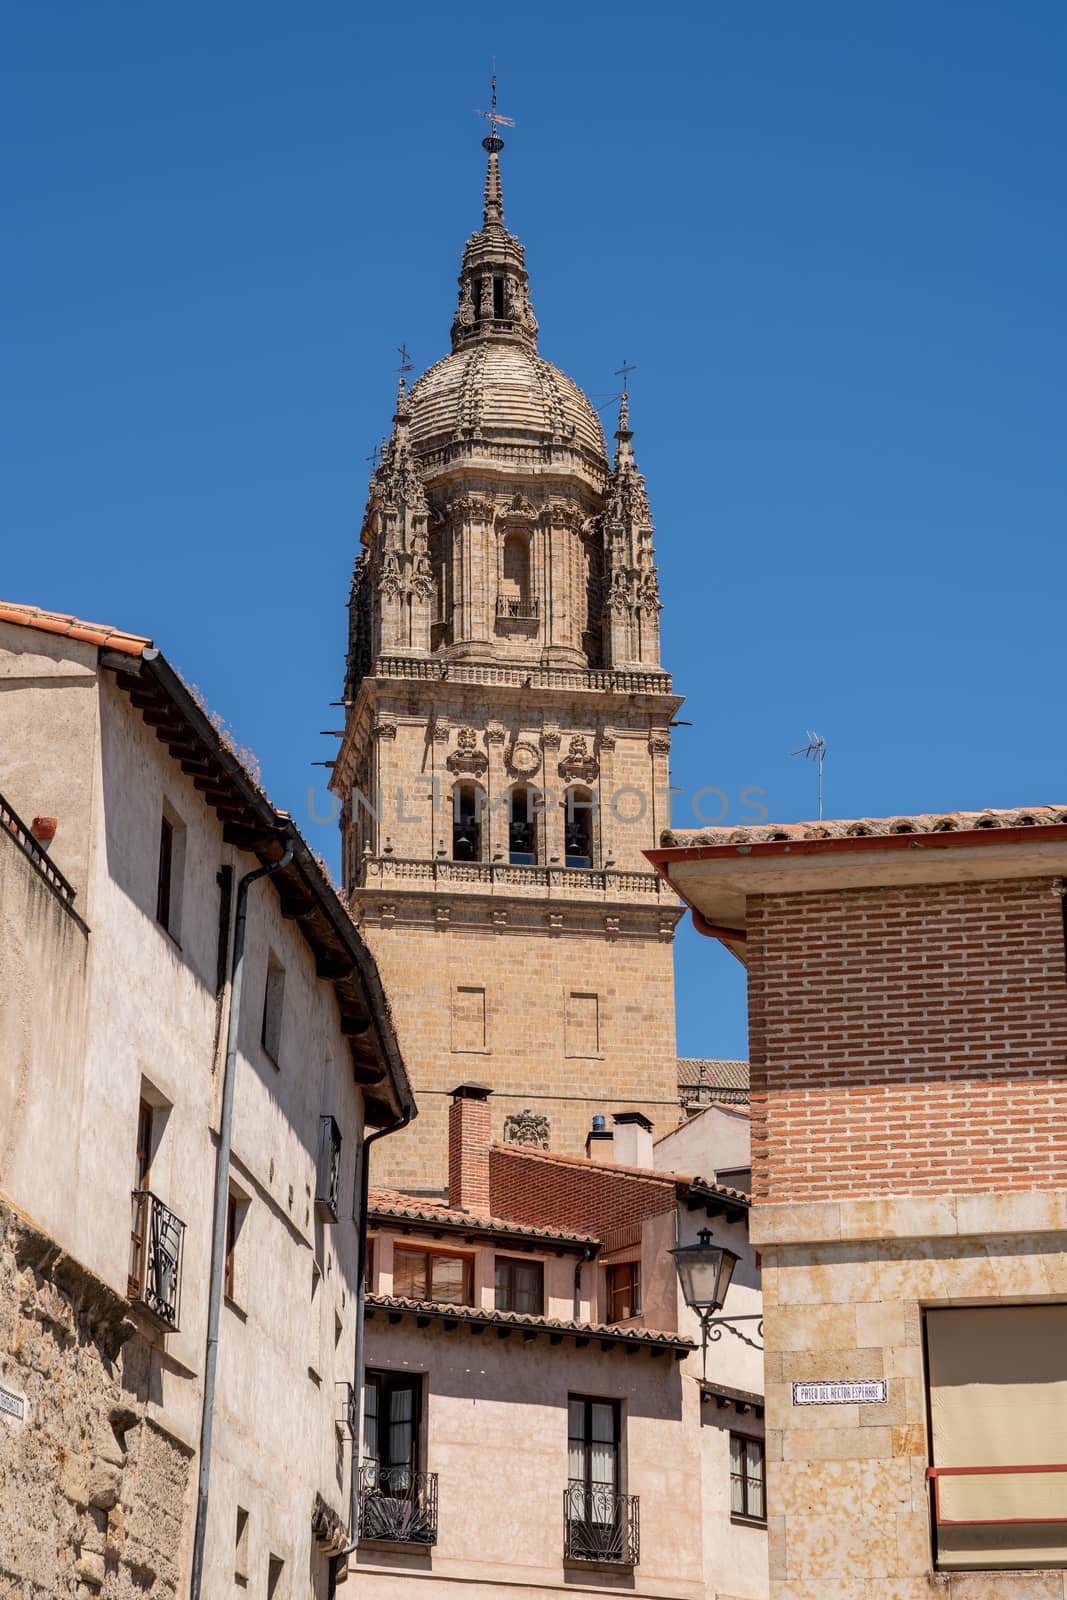 Ornate bell tower on the old Cathedral in Salamanca by steheap